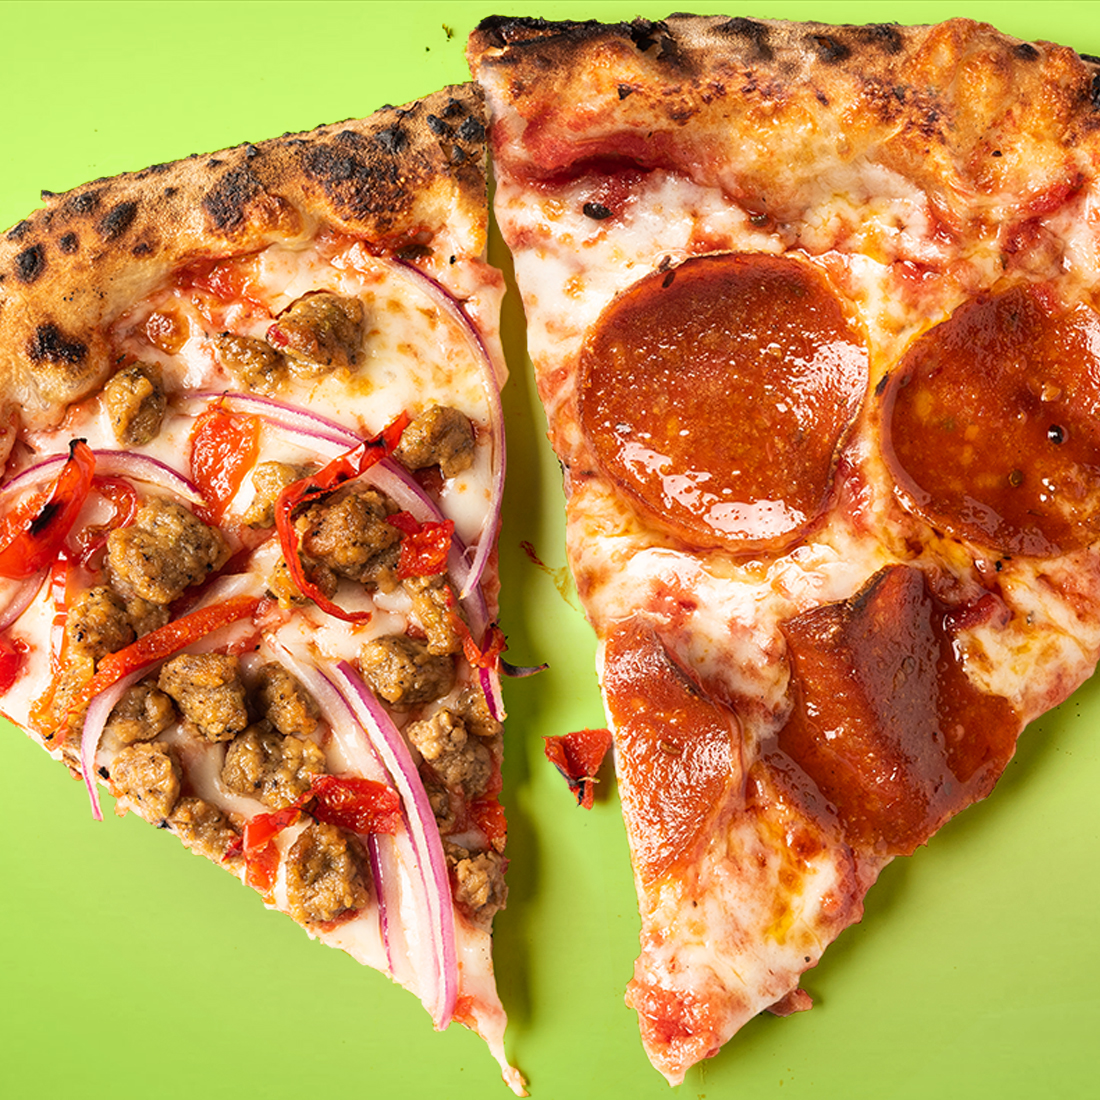 Two slices of pizza with plant-based toppings on a green gradient background